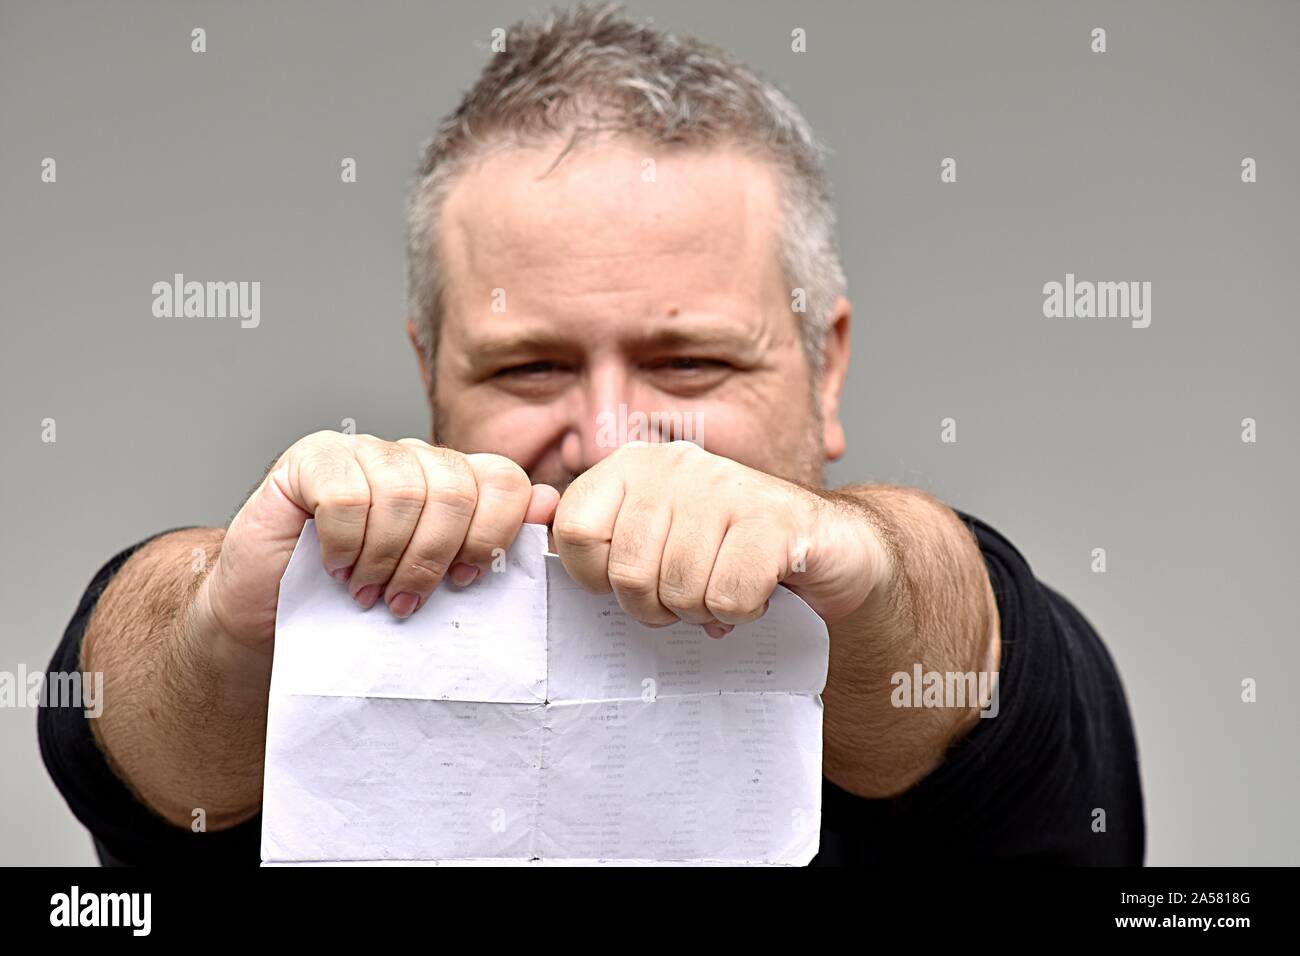 An Angry Overweight Man Reading Documents Stock Photo